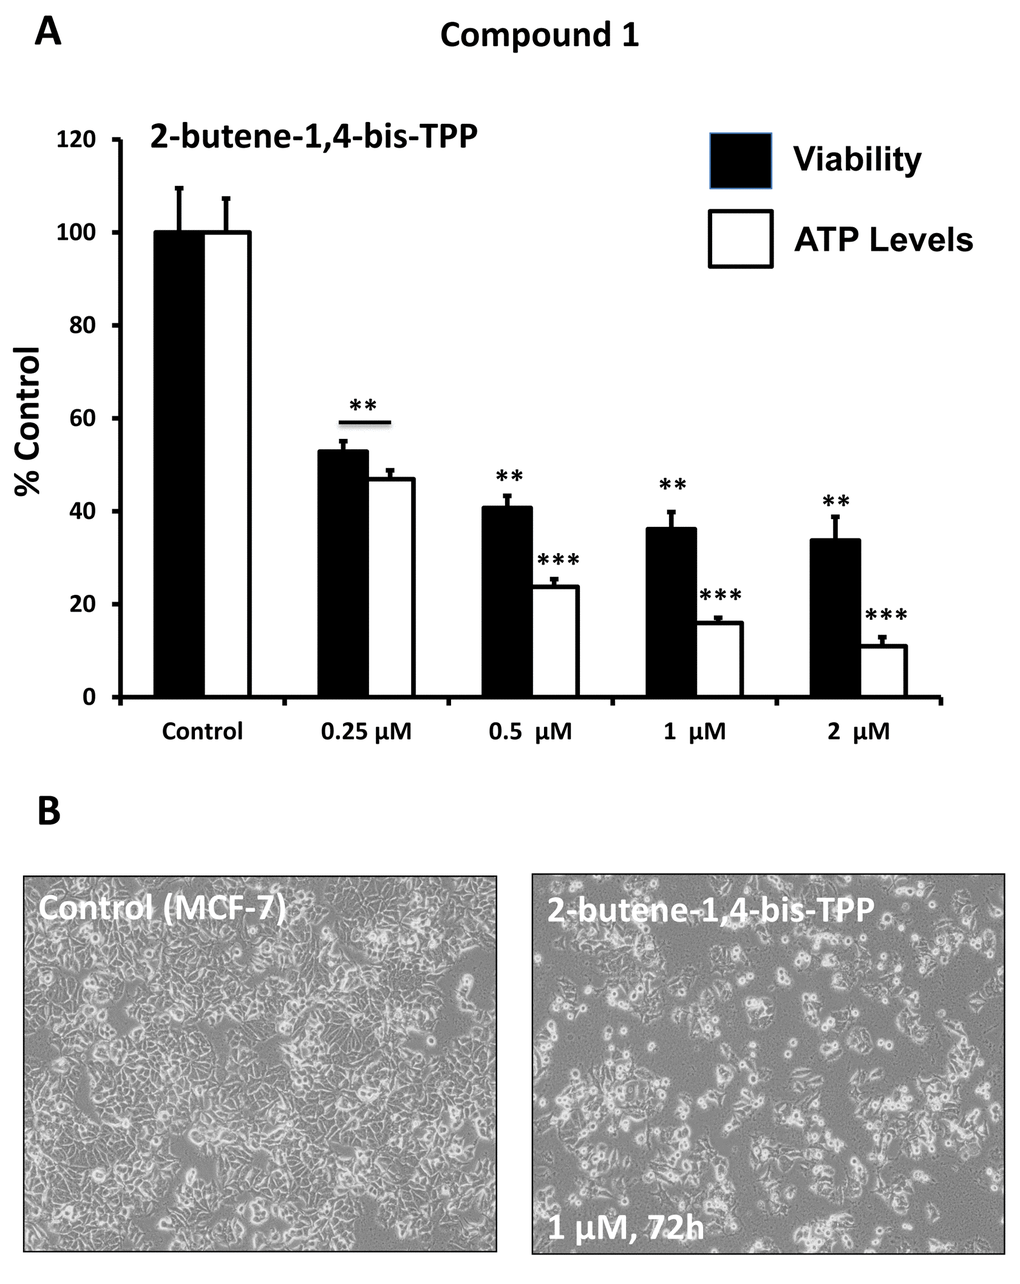 Effect of TPP derivatives on cell viability and intracellular ATP levels in MCF-7 human breast cancer cells: Compound 1. Cell viability and intracellular ATP levels were determined in the same treated samples. Hoechst staining (%) (shown in black bars); ATP levels (%) indicated in white bars. MCF-7 cells were treated for 72h. Data are represented as mean +/- SEM. Note that 2-butene-1,4-bis-TPP depletes ATP levels, relative to cell number. **p 